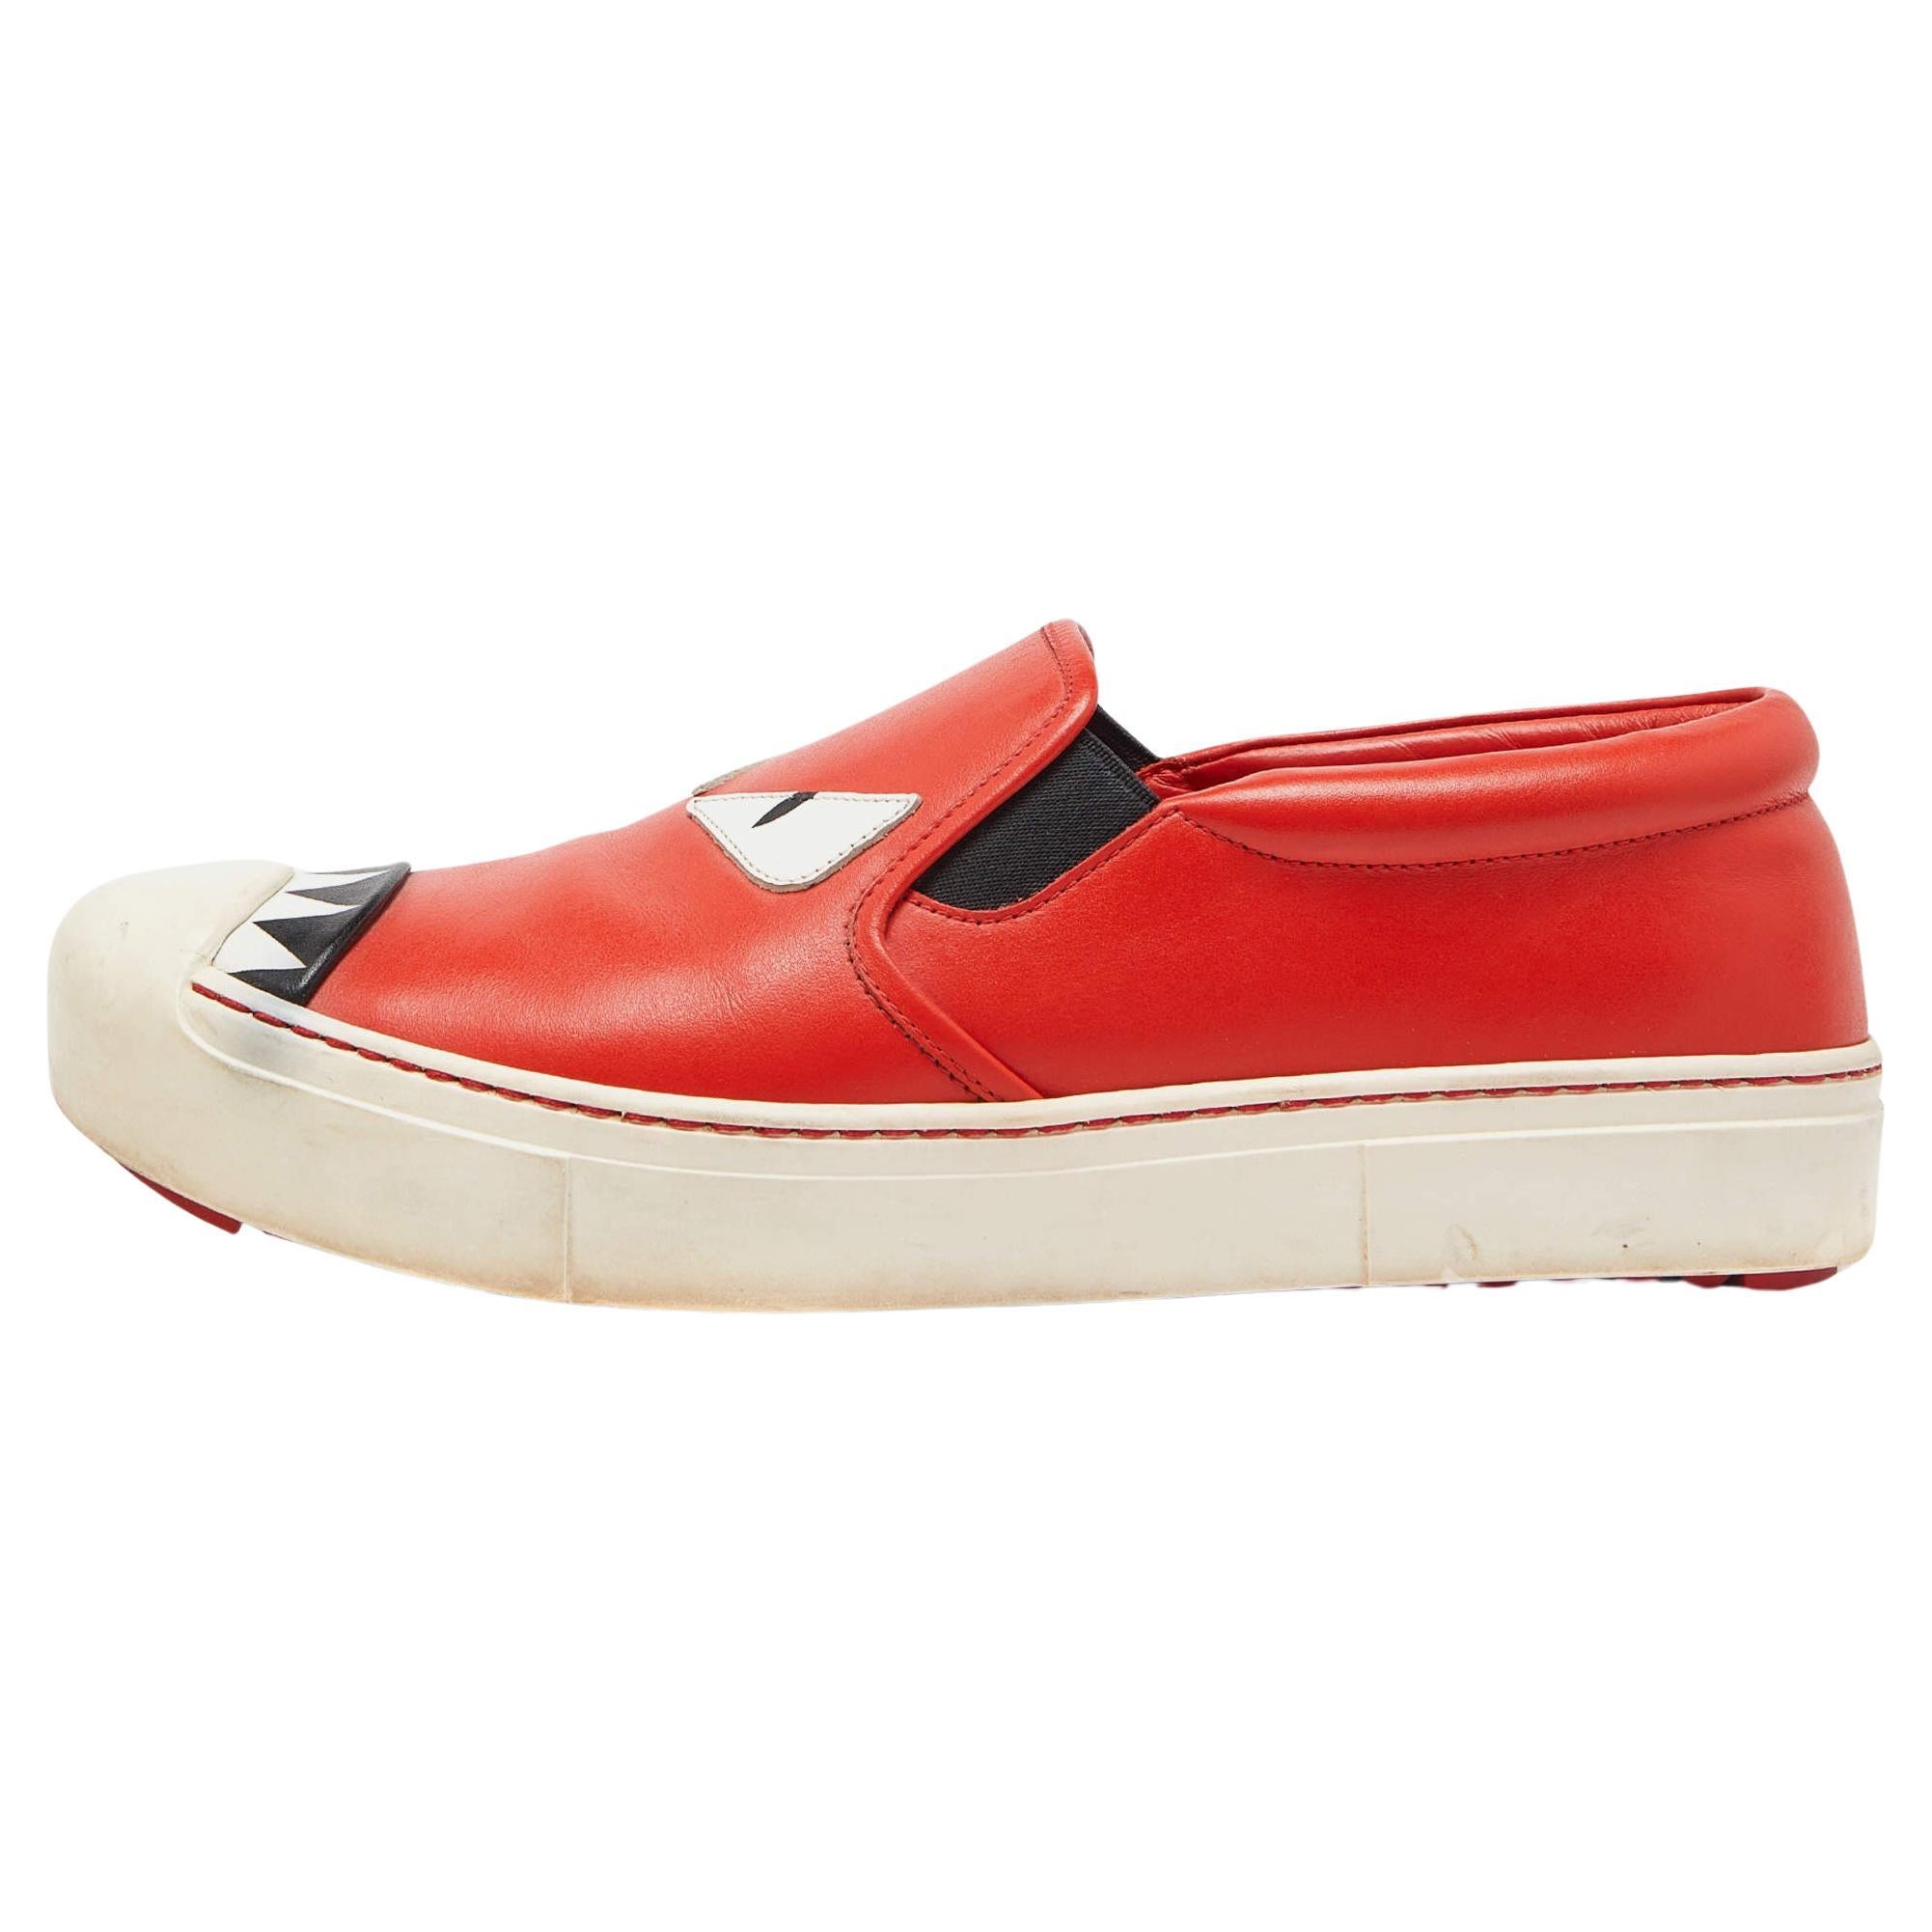 Fendi Tri Color Leather Monster Slip On Sneakers Size 38.5 For Sale